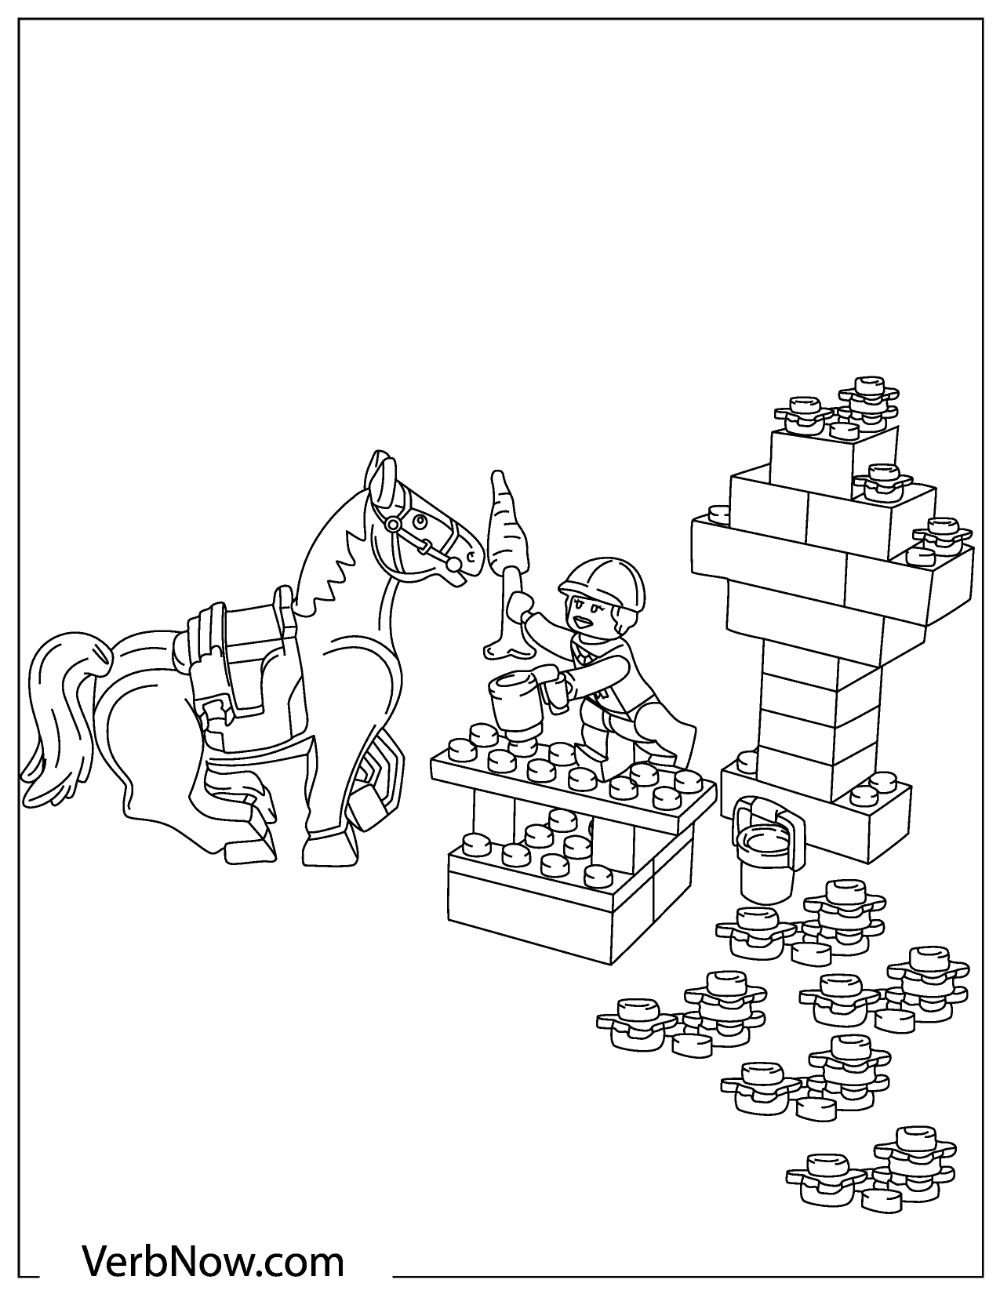 Free lego coloring pages for download printable pdf